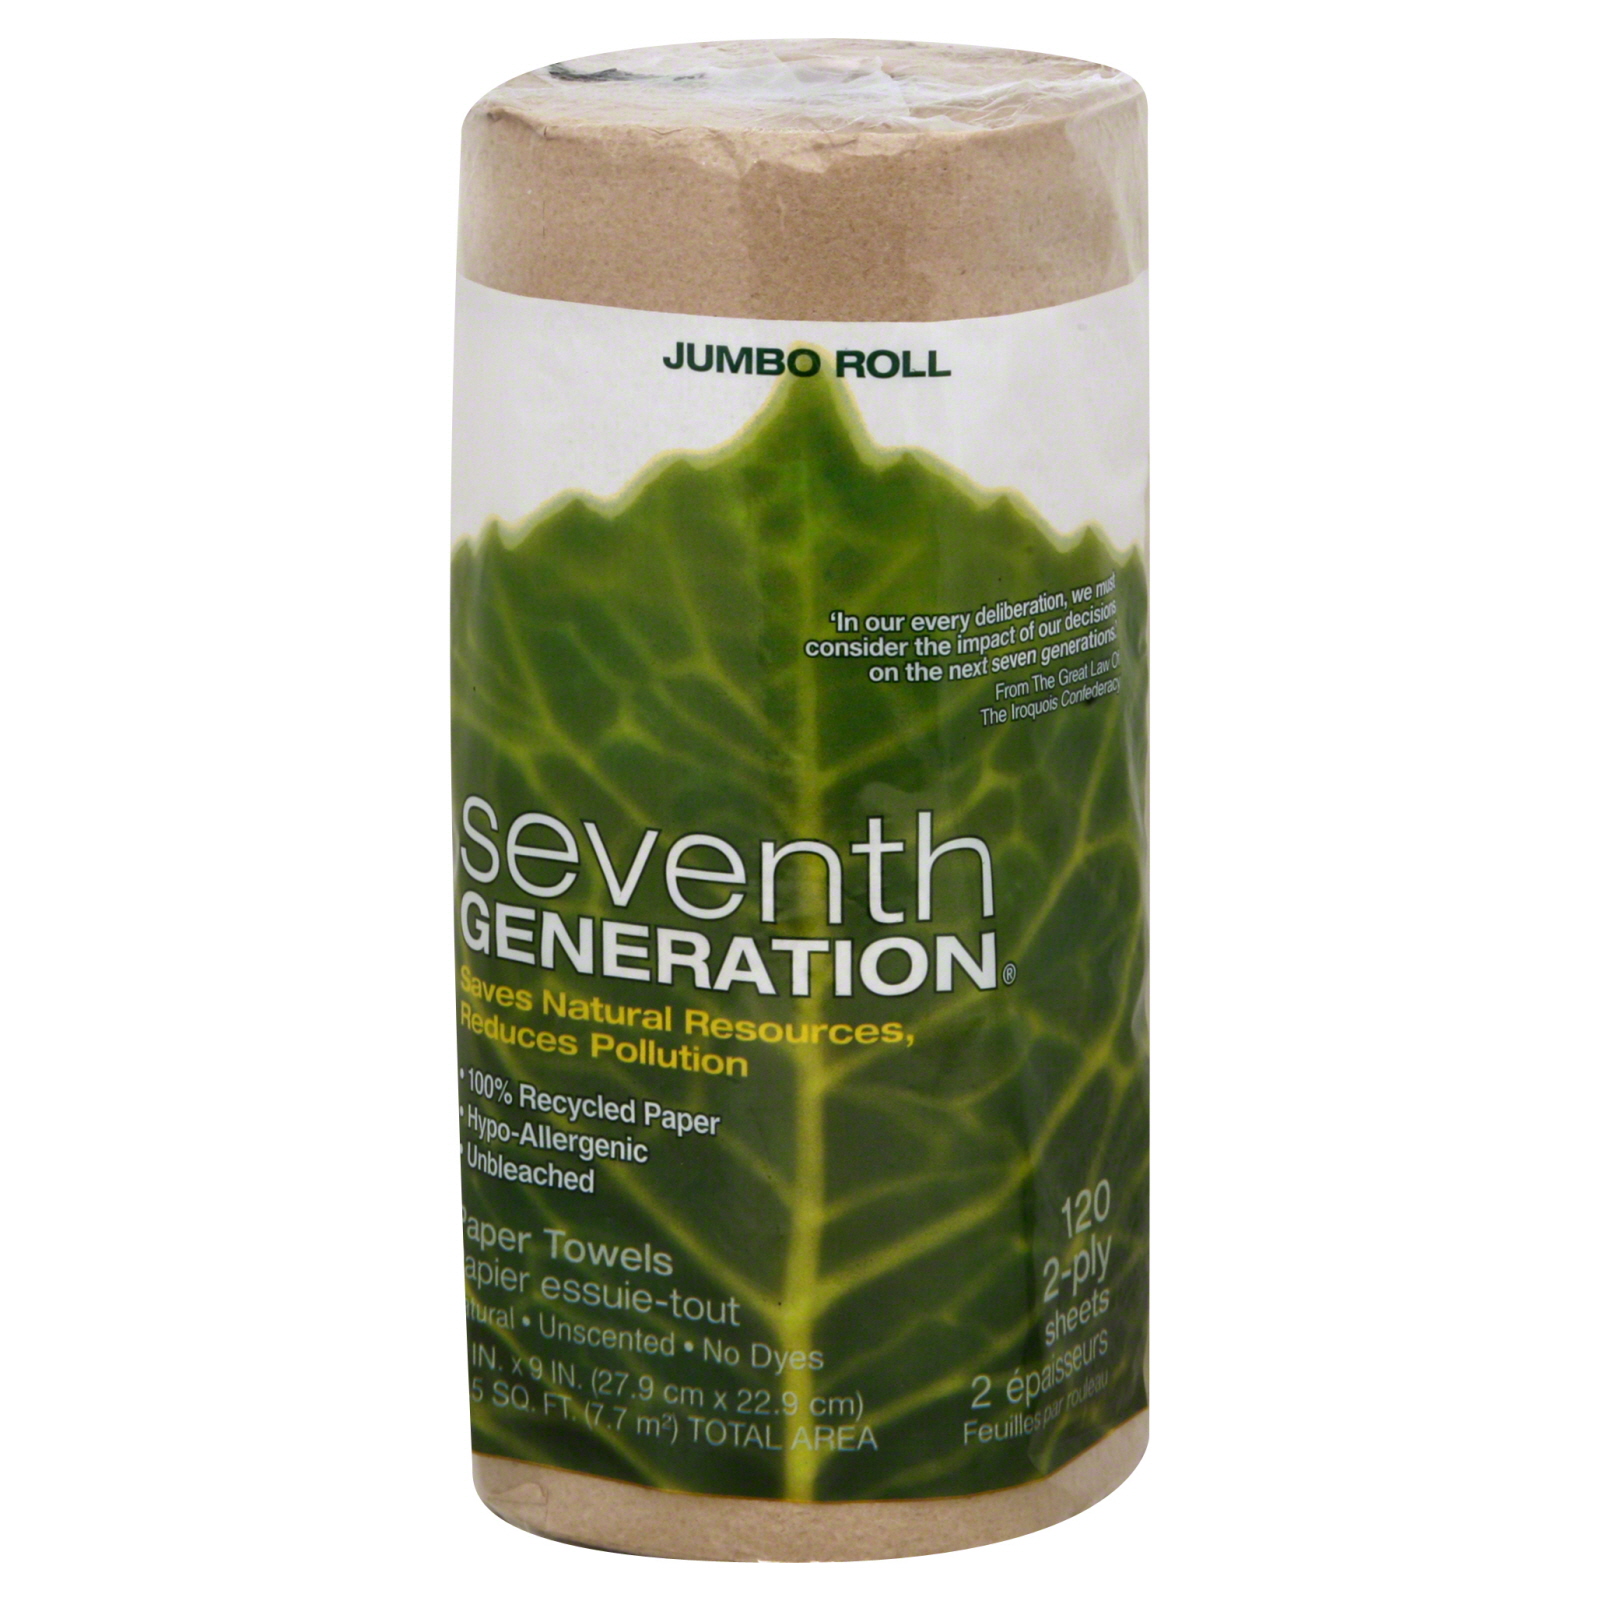 Seventh Generation SEV13720 100% Recycled Paper Towels